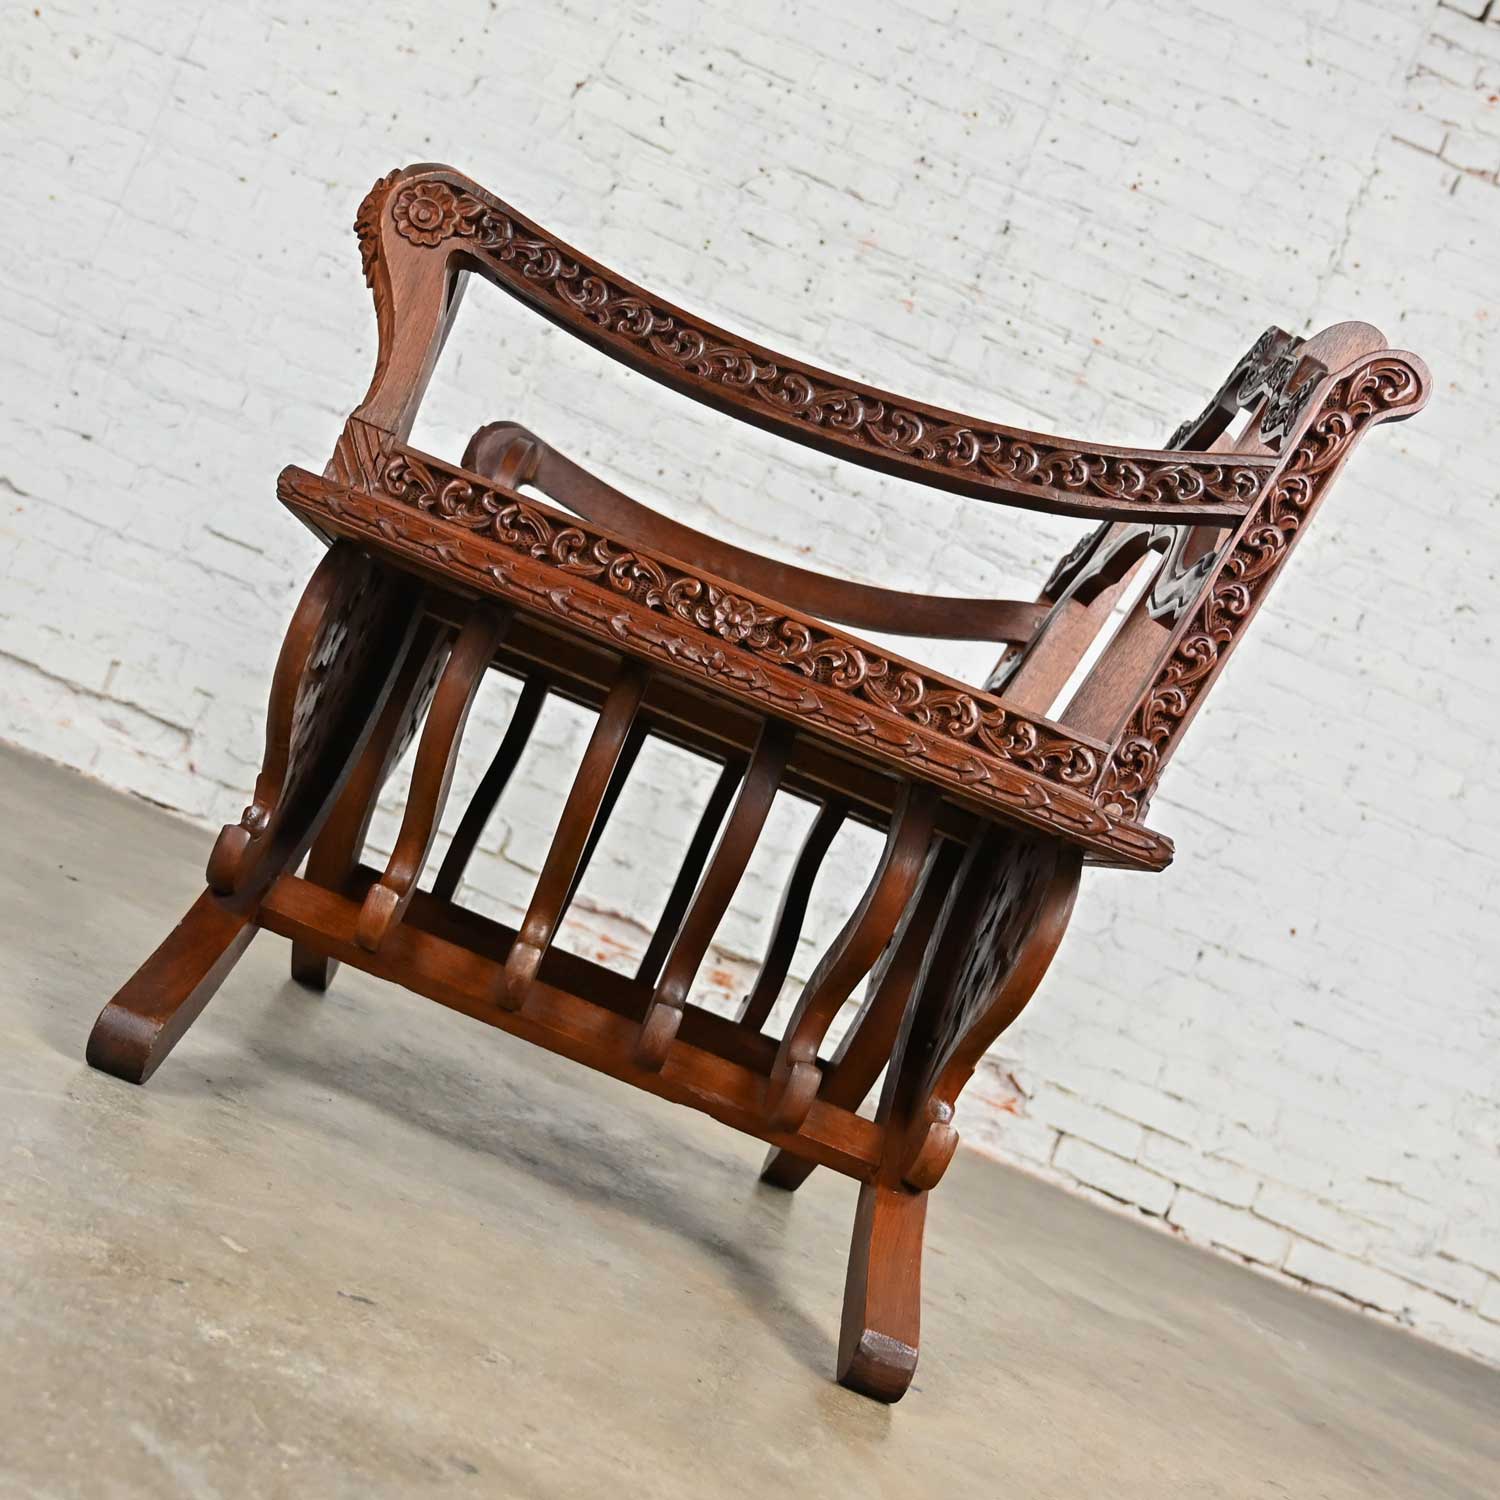 Vintage Chinoiserie Hand Carved Rosewood Howdah or Elephant Saddle Chair from Bangkok Thailand